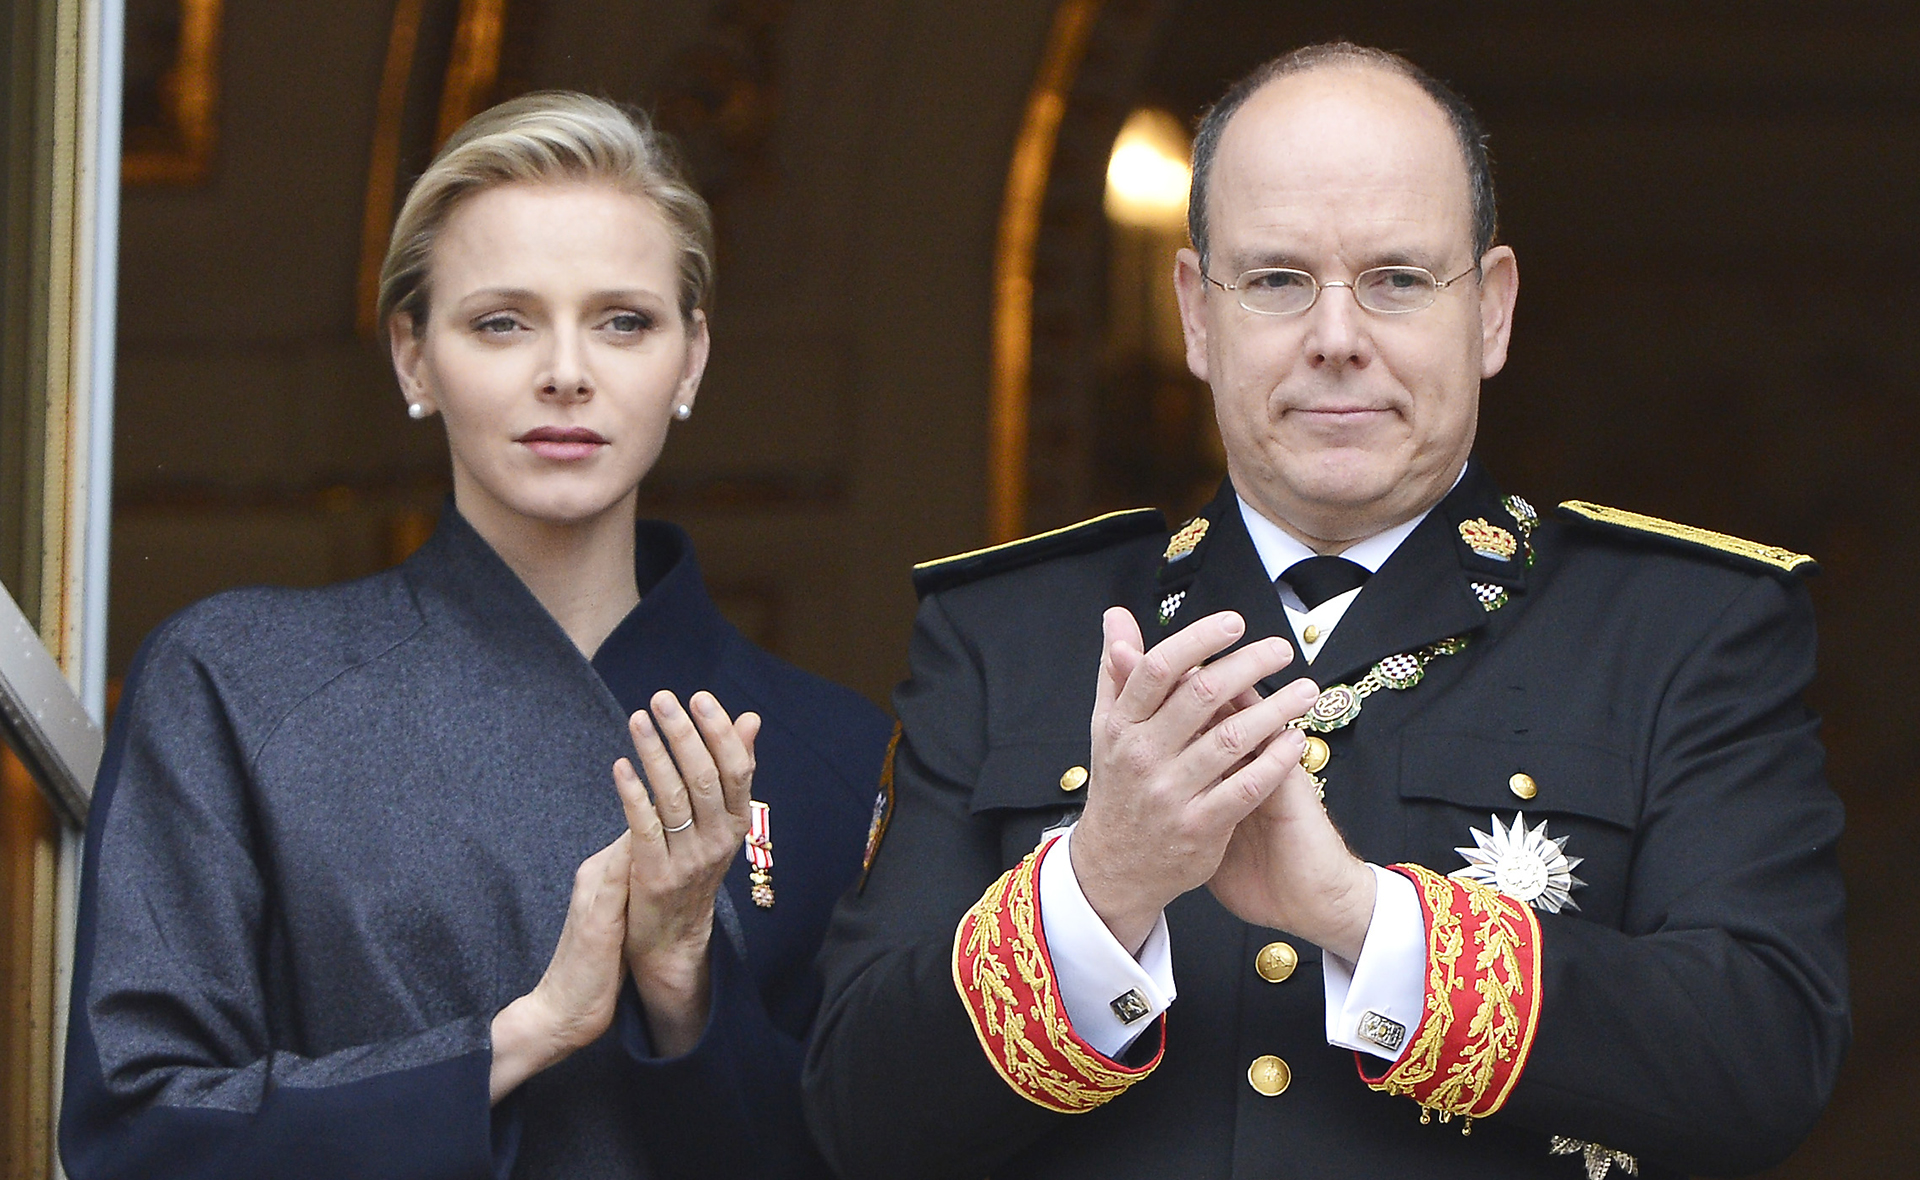 EXCLUSIVE: How Princess Charlene really feels about THAT photo of Prince Albert’s love children with her twins